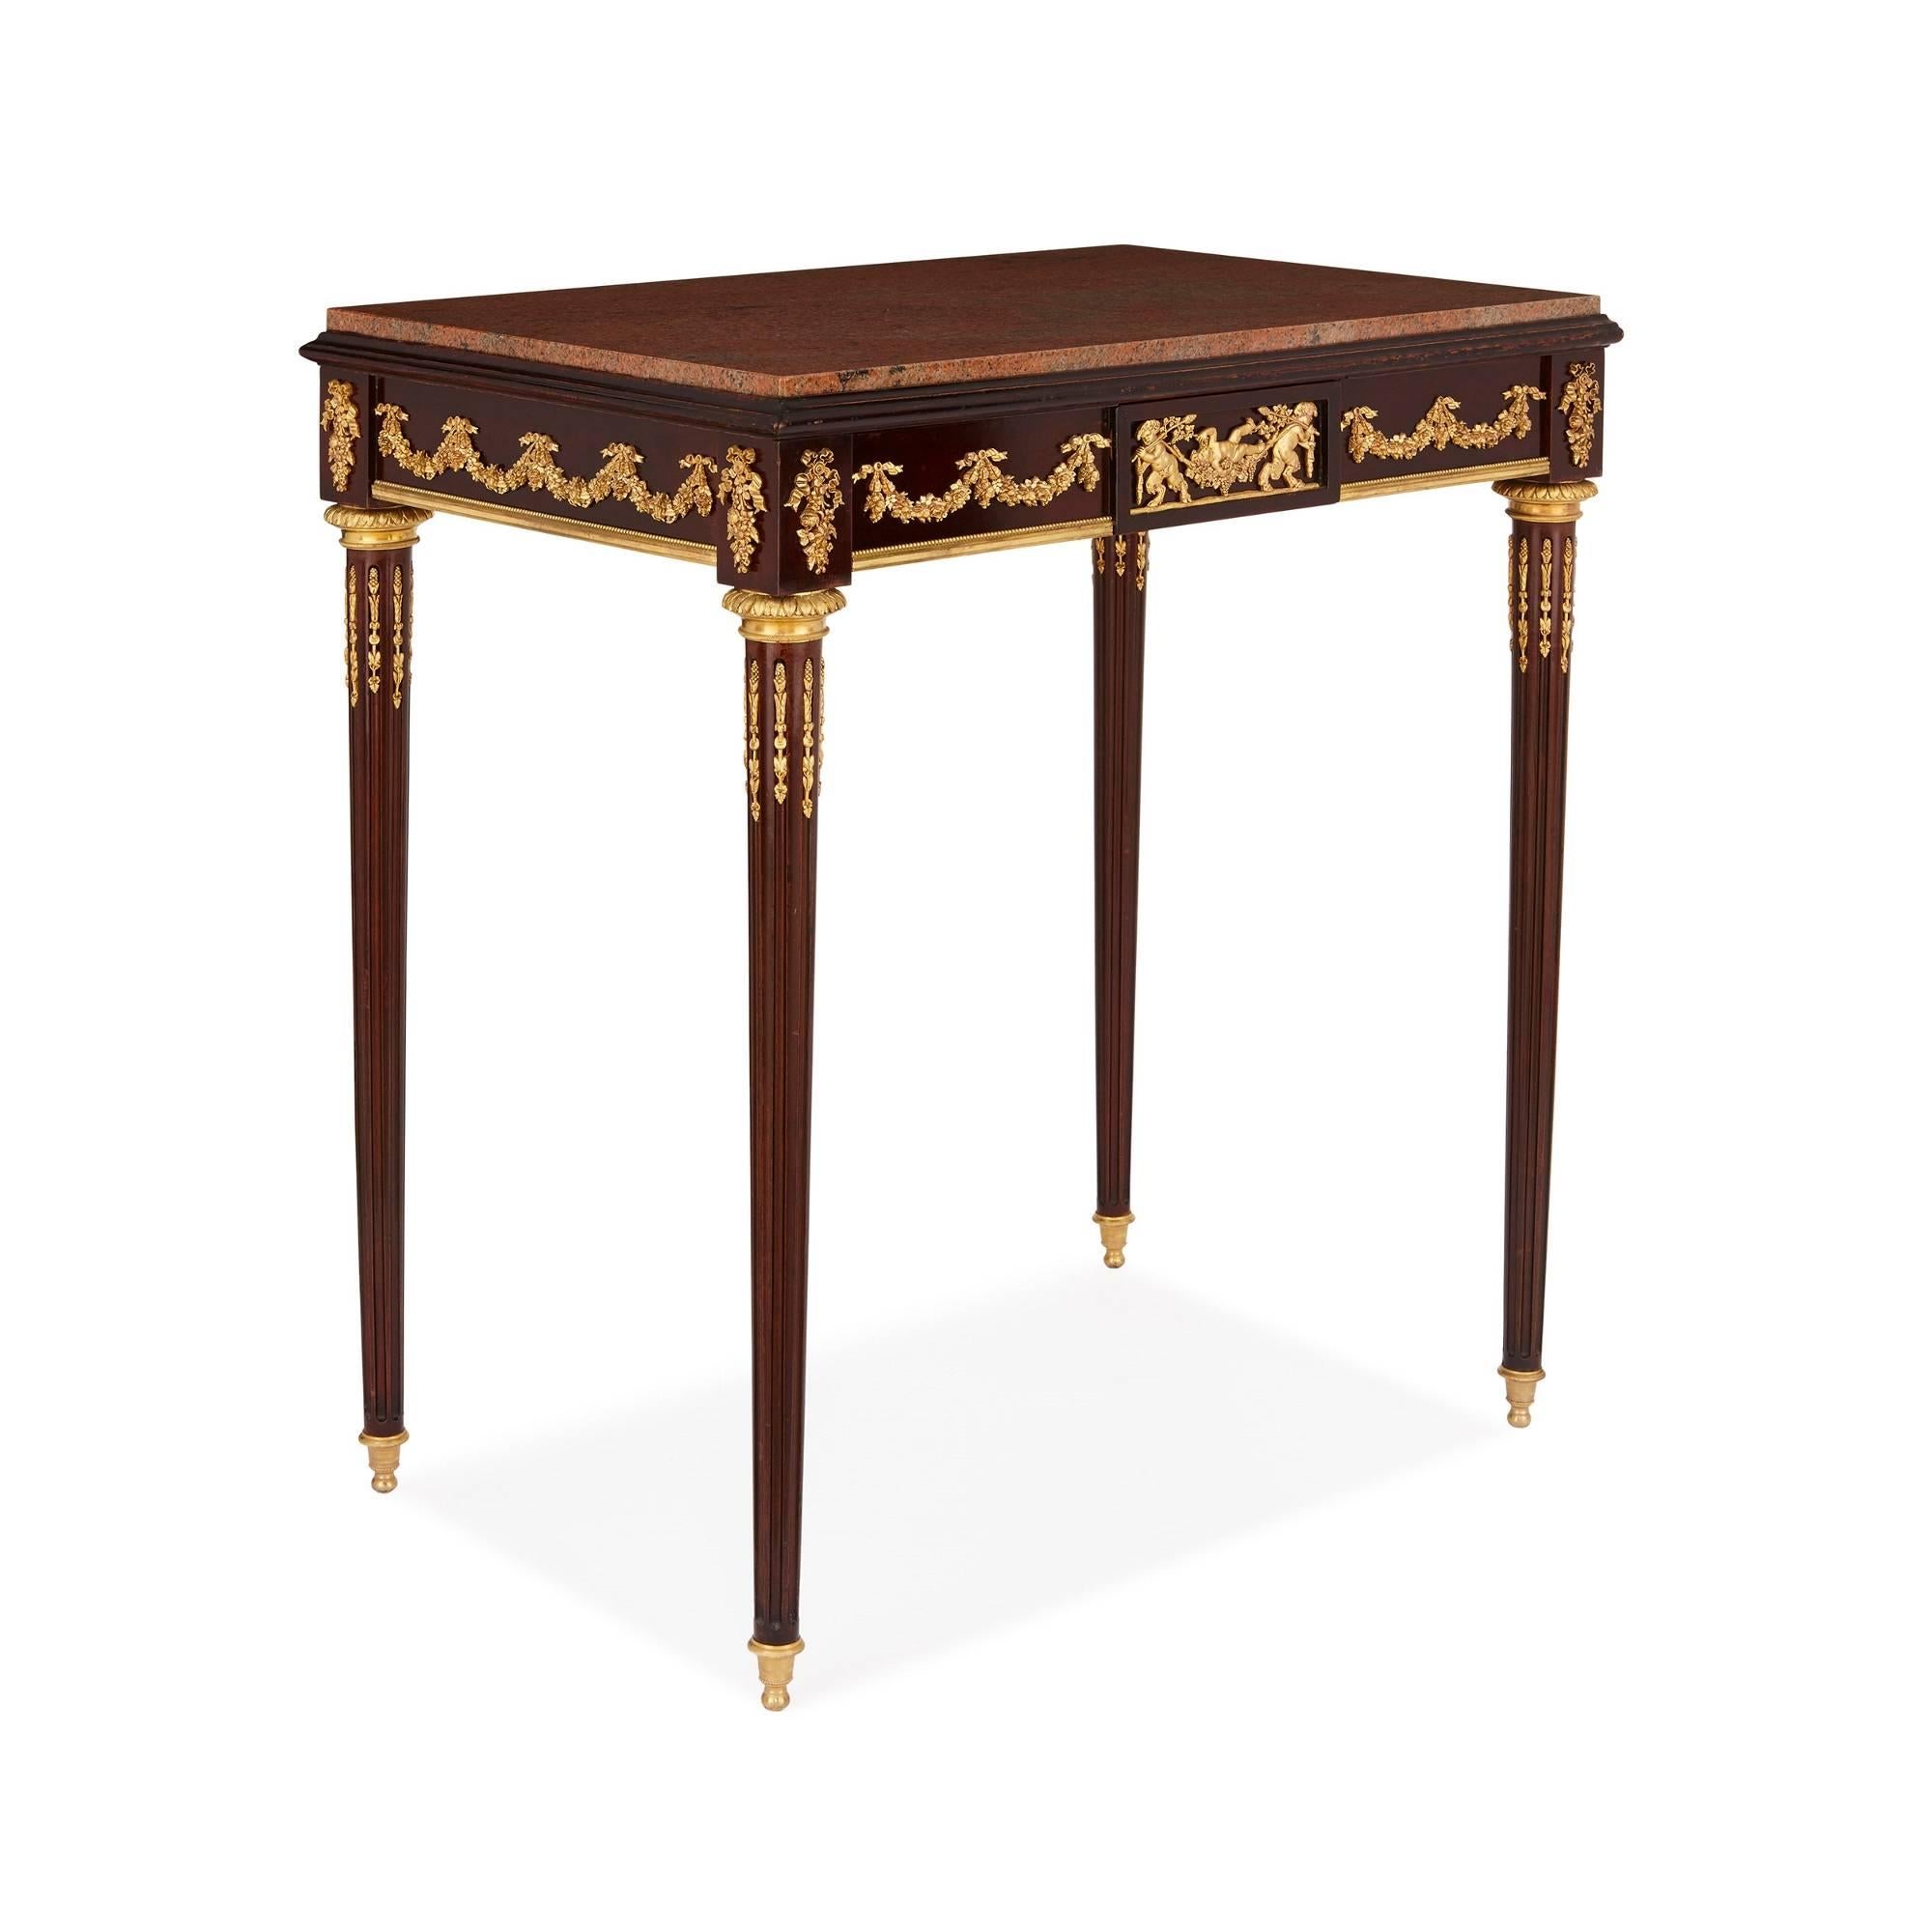 The beautiful neoclassical style designs of Jean-Henri Riesener (1735-1806), perhaps the most celebrated cabinetmaker of all time, are the inspiration for this wonderful antique side table. In particular, the ormolu mounts which adorn the piece -